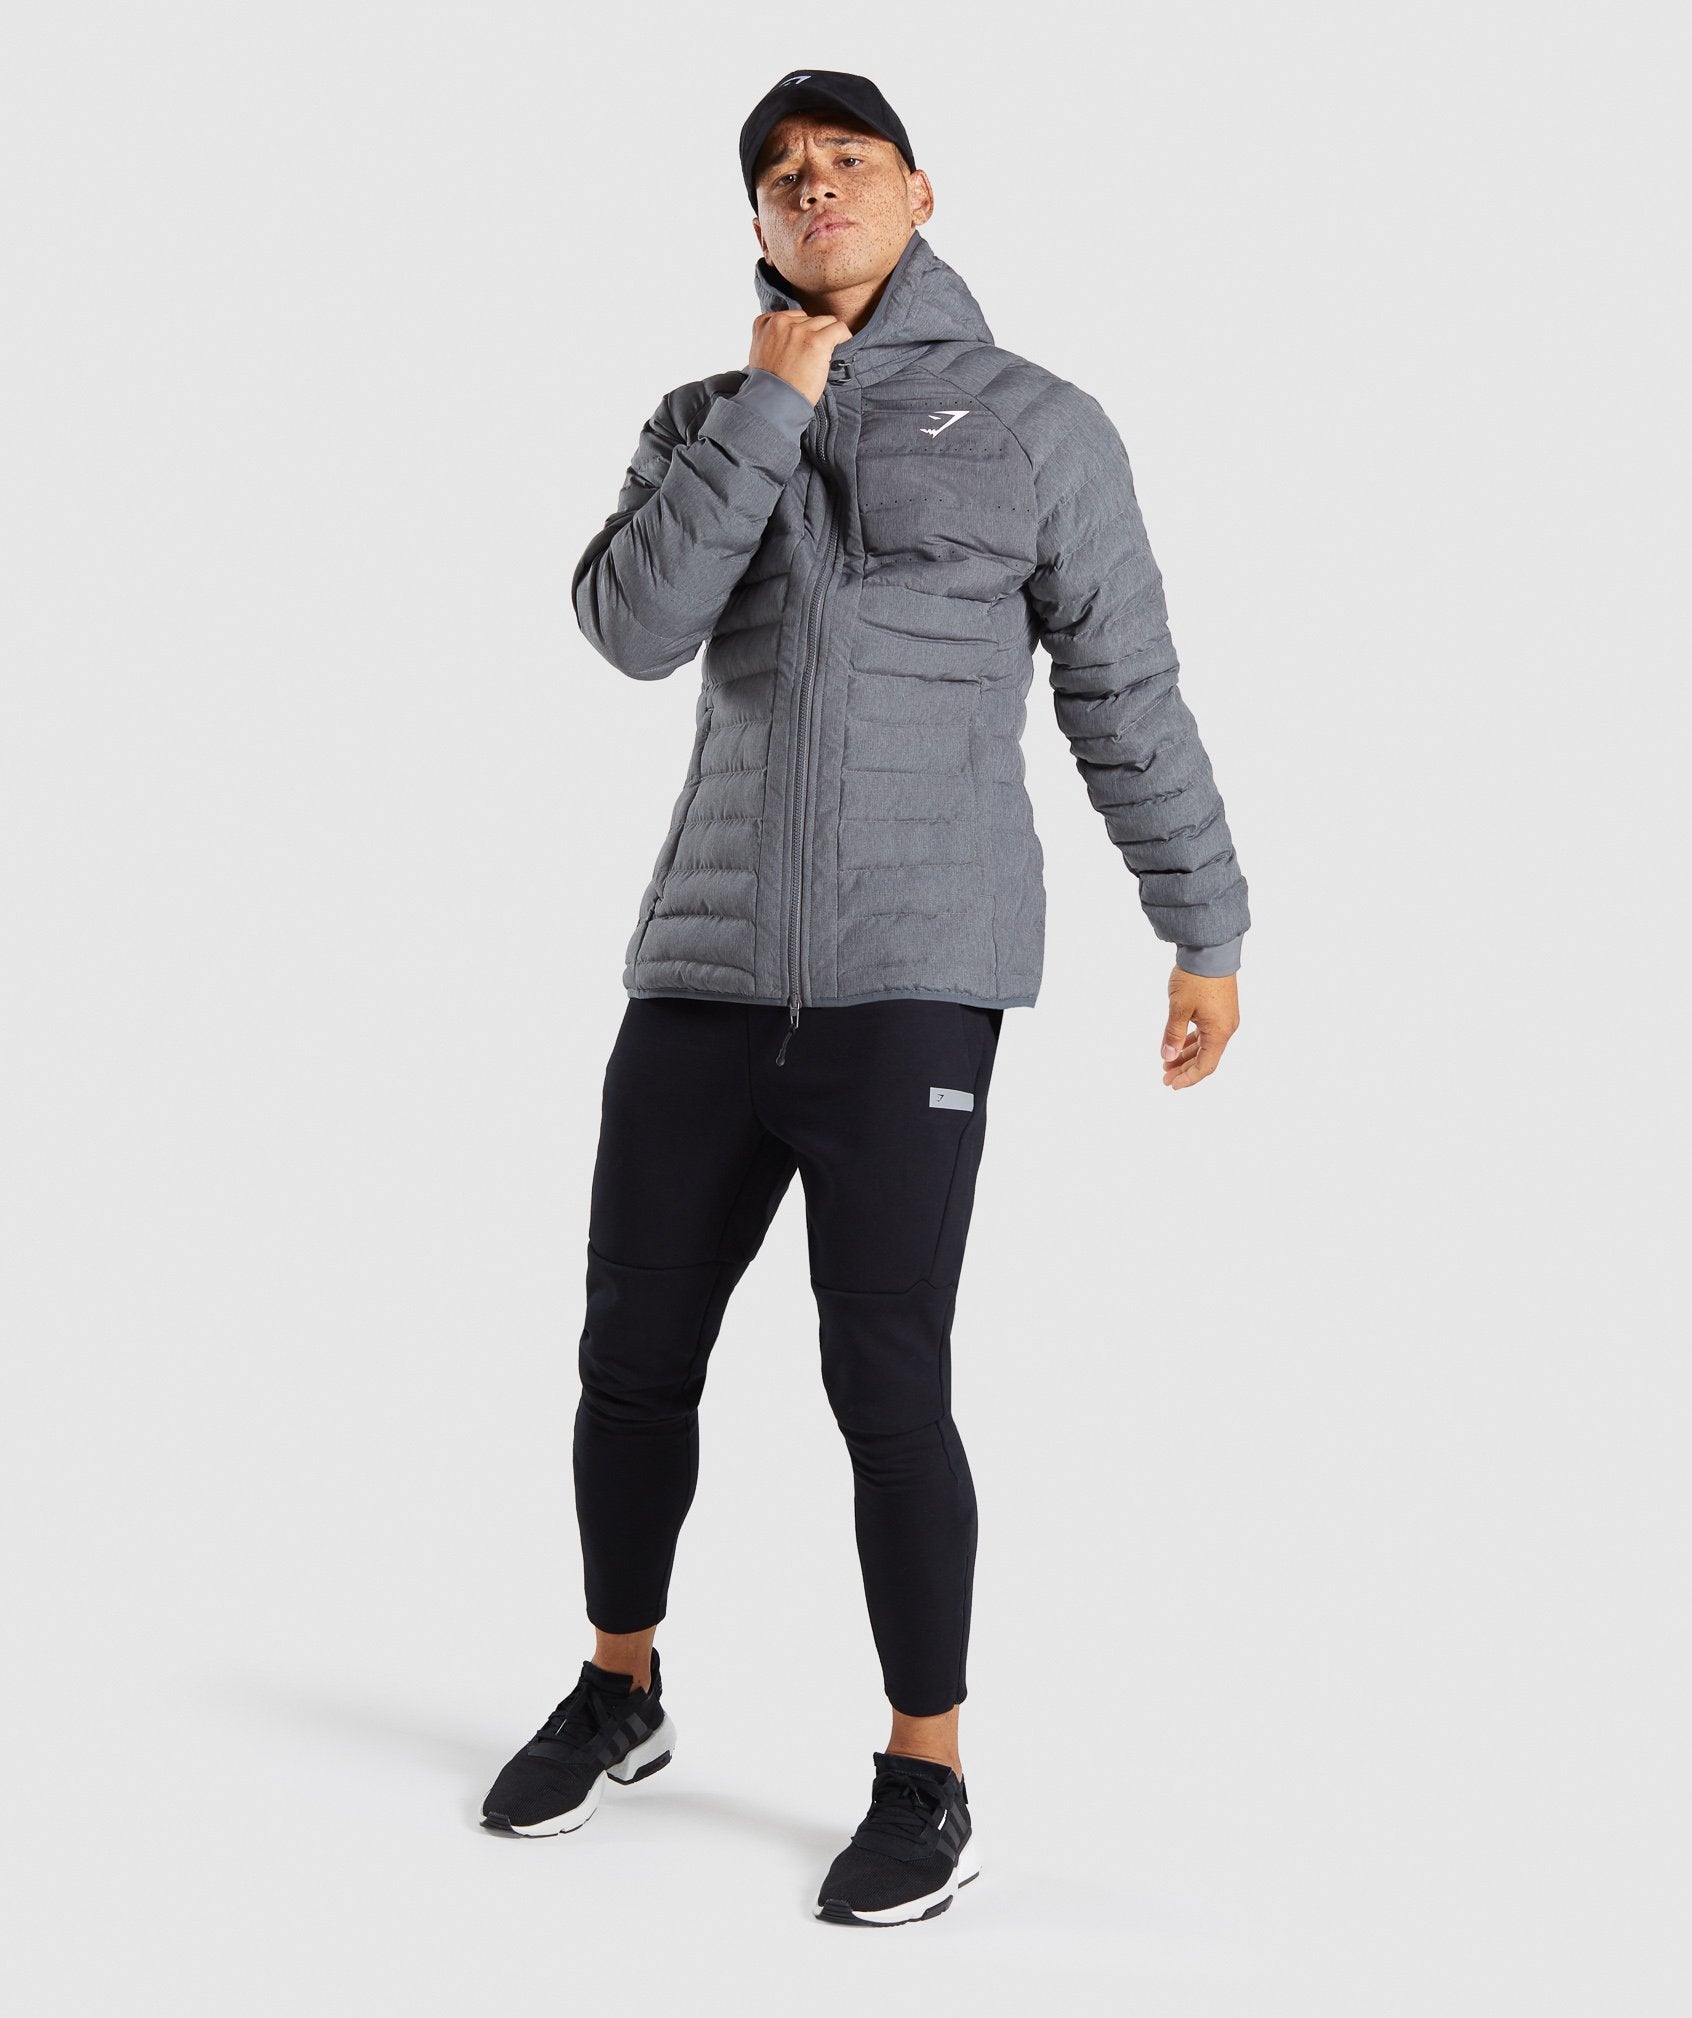 Sector Jacket V2 in Charcoal Marl - view 4